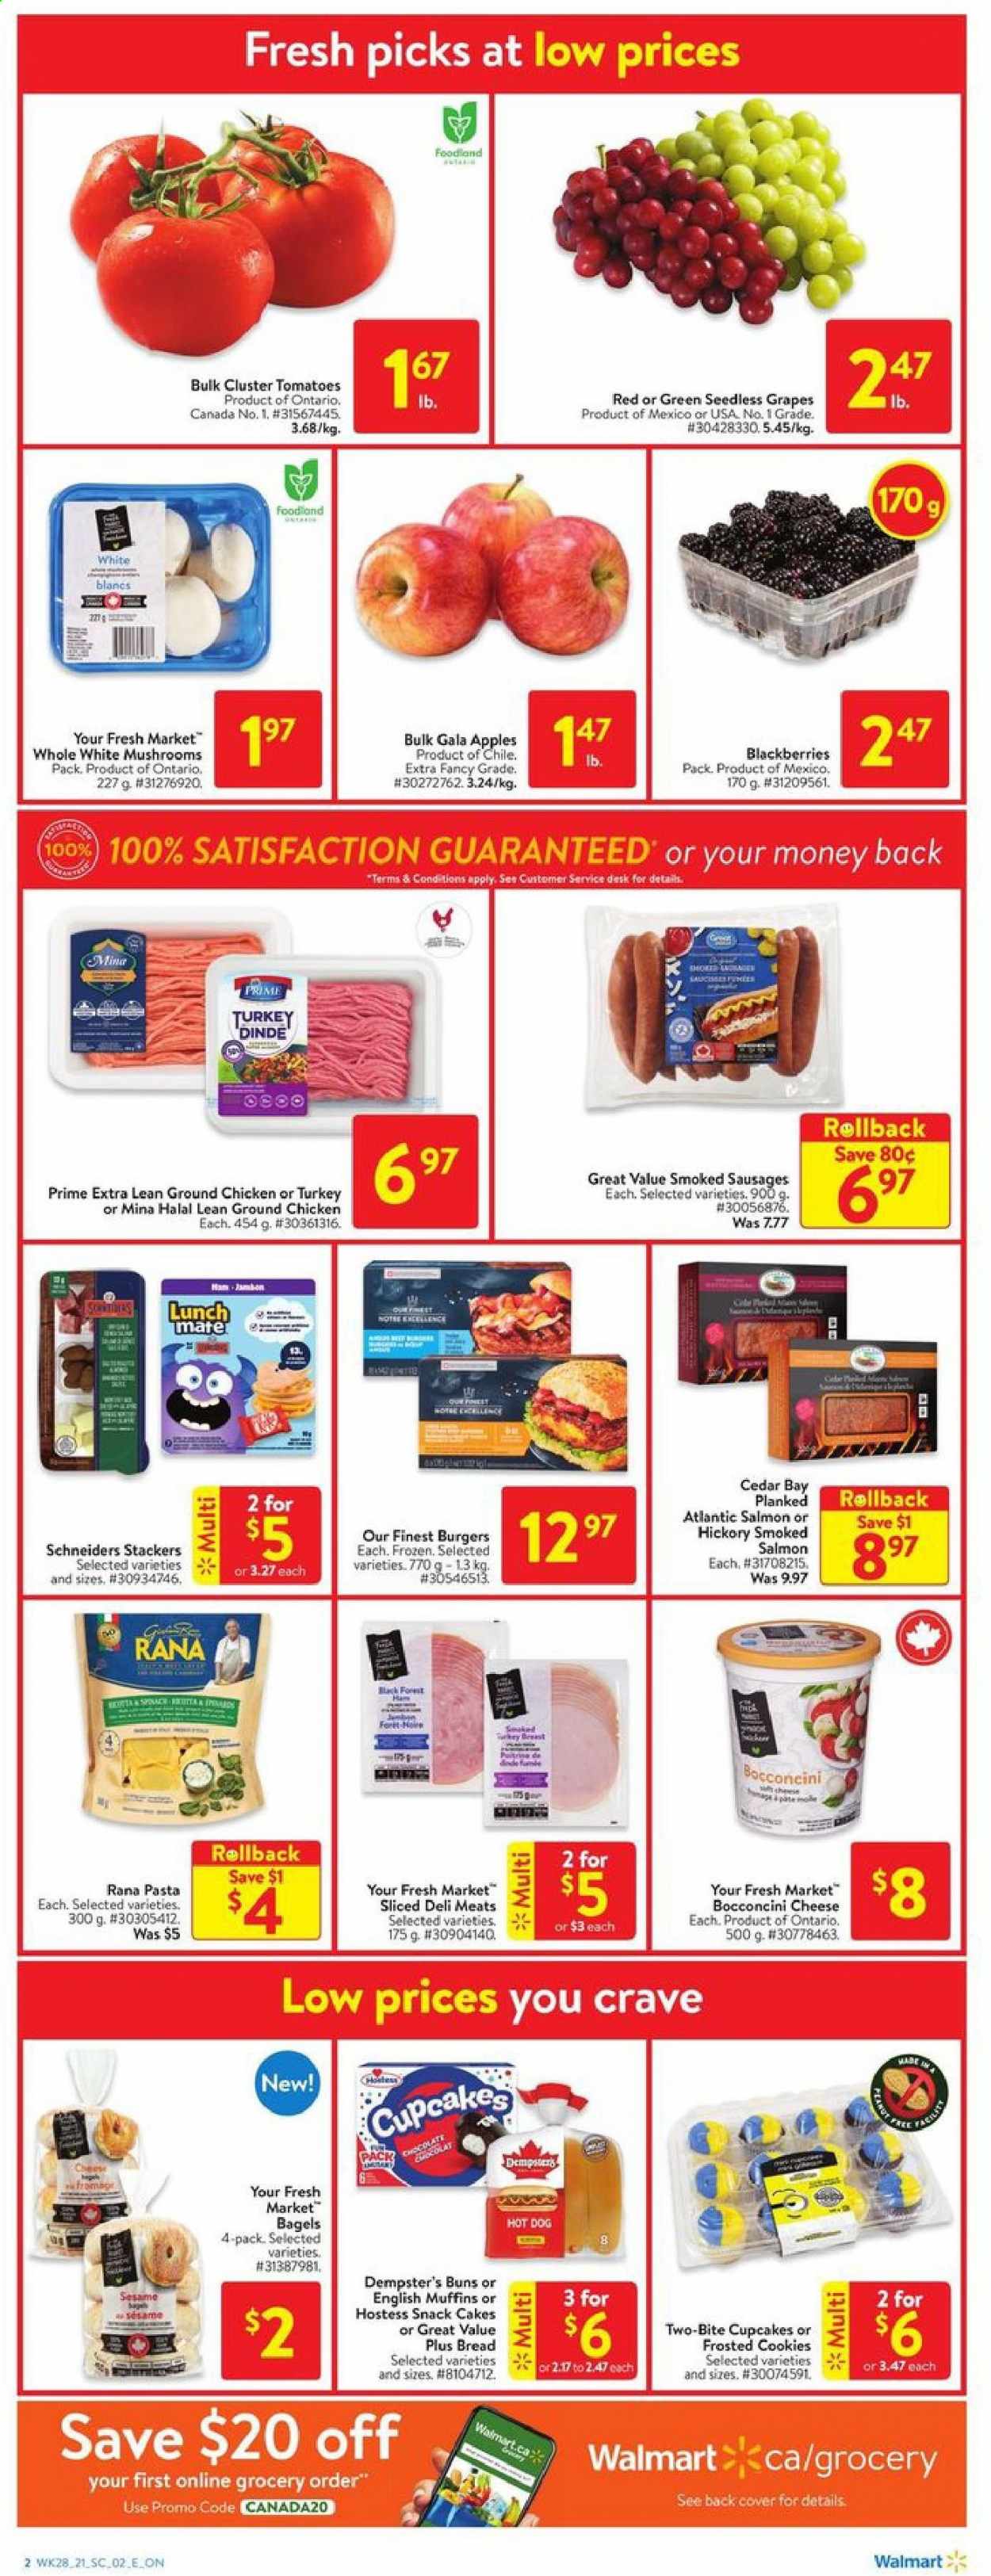 thumbnail - Walmart Flyer - August 05, 2021 - August 11, 2021 - Sales products - mushrooms, bagels, bread, english muffins, cake, buns, cupcake, tomatoes, apples, blackberries, Gala, grapes, seedless grapes, salmon, smoked salmon, hot dog, hamburger, pasta, Giovanni Rana, Rana, ham, sausage, bocconcini, cheese, cookies, snack, ground chicken, chicken. Page 2.